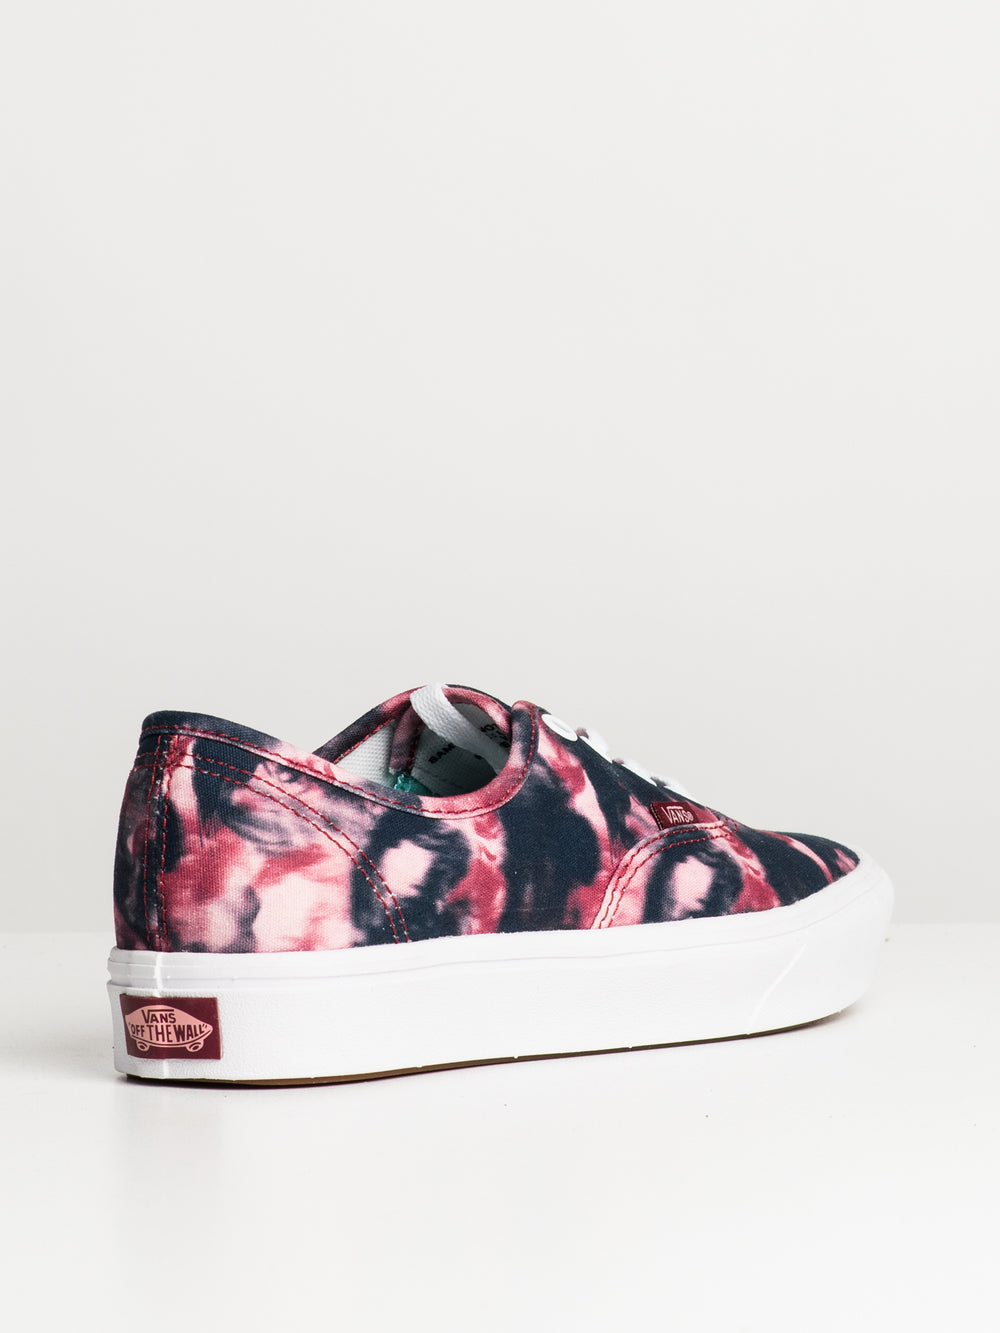 WOMENS VANS COMFYCUSH AUTHENTIC GRUNGE SNEAKER - CLEARANCE